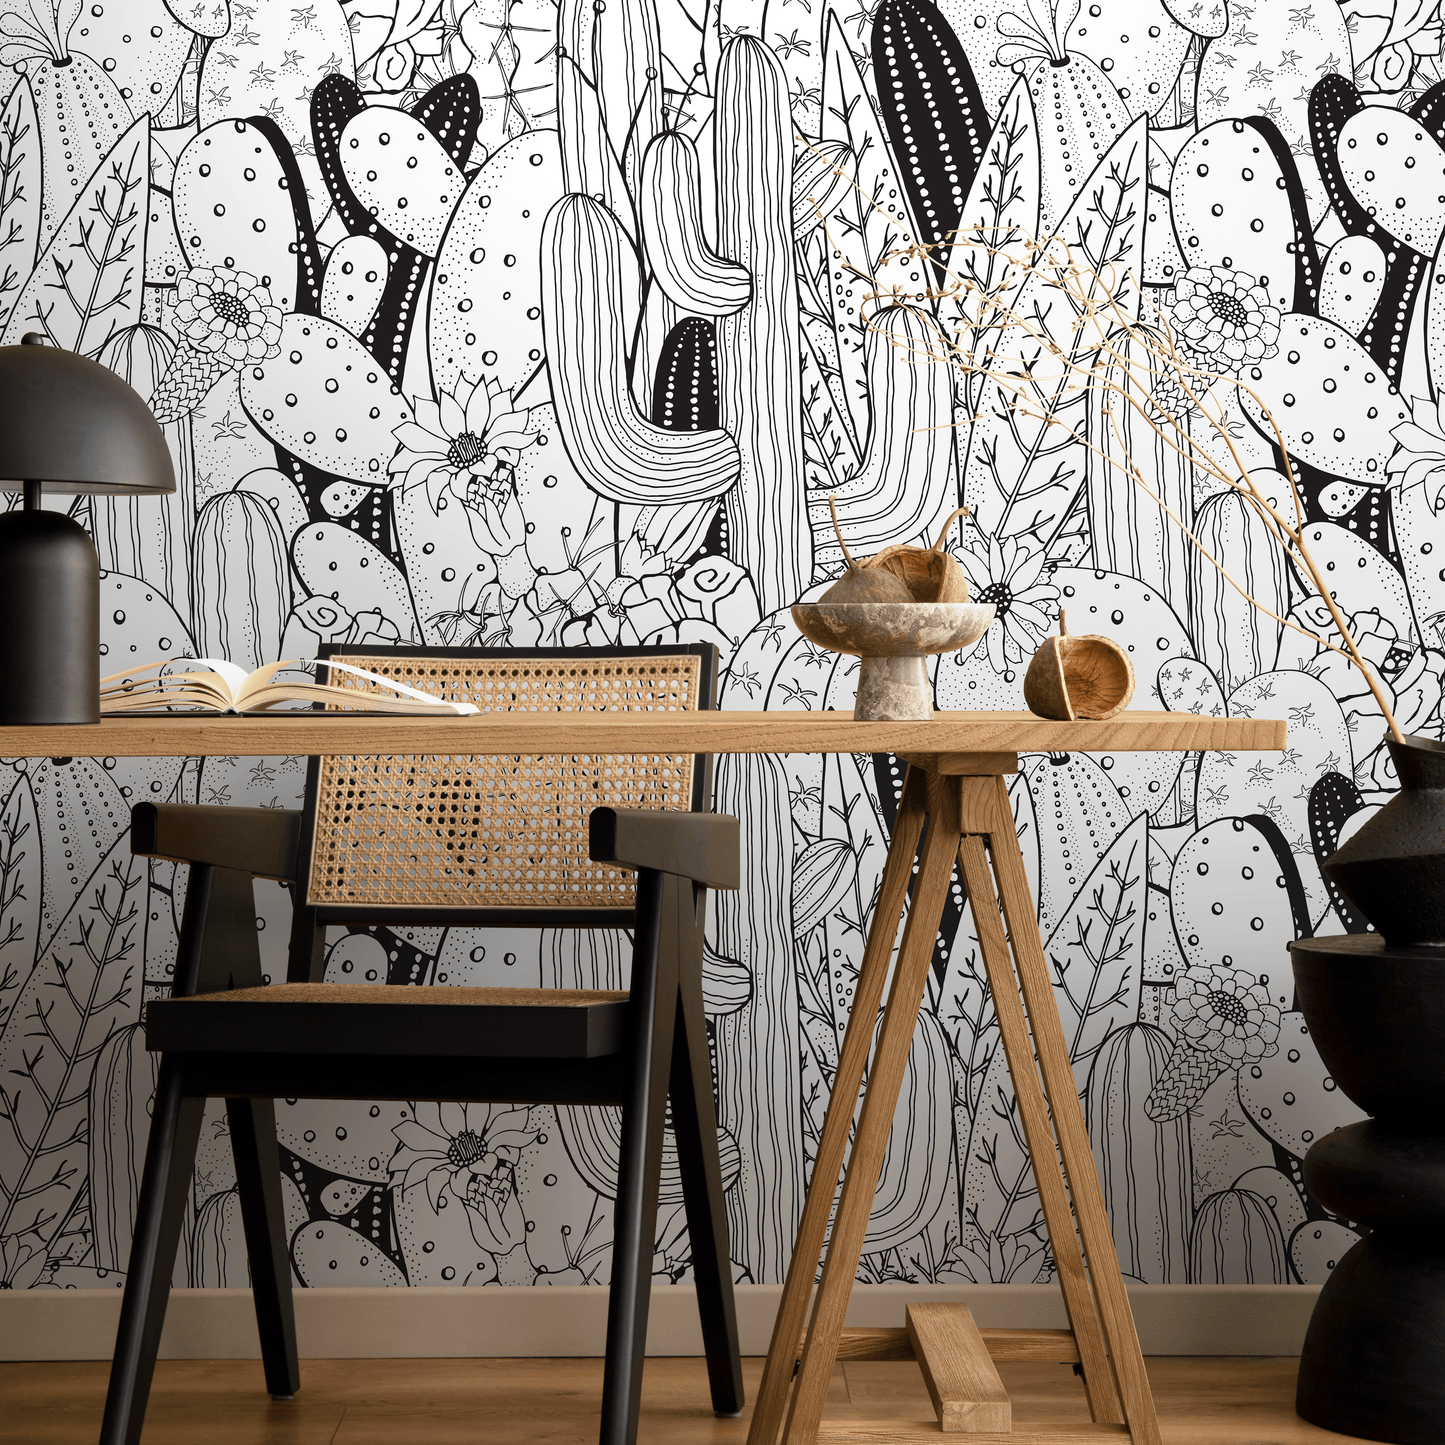 Peel and Stick Wallpaper Removable Wallpaper Wall Decor Home Decor Wall Art Printable Wall Art Room Decor Wall Prints Wall Hanging - A946